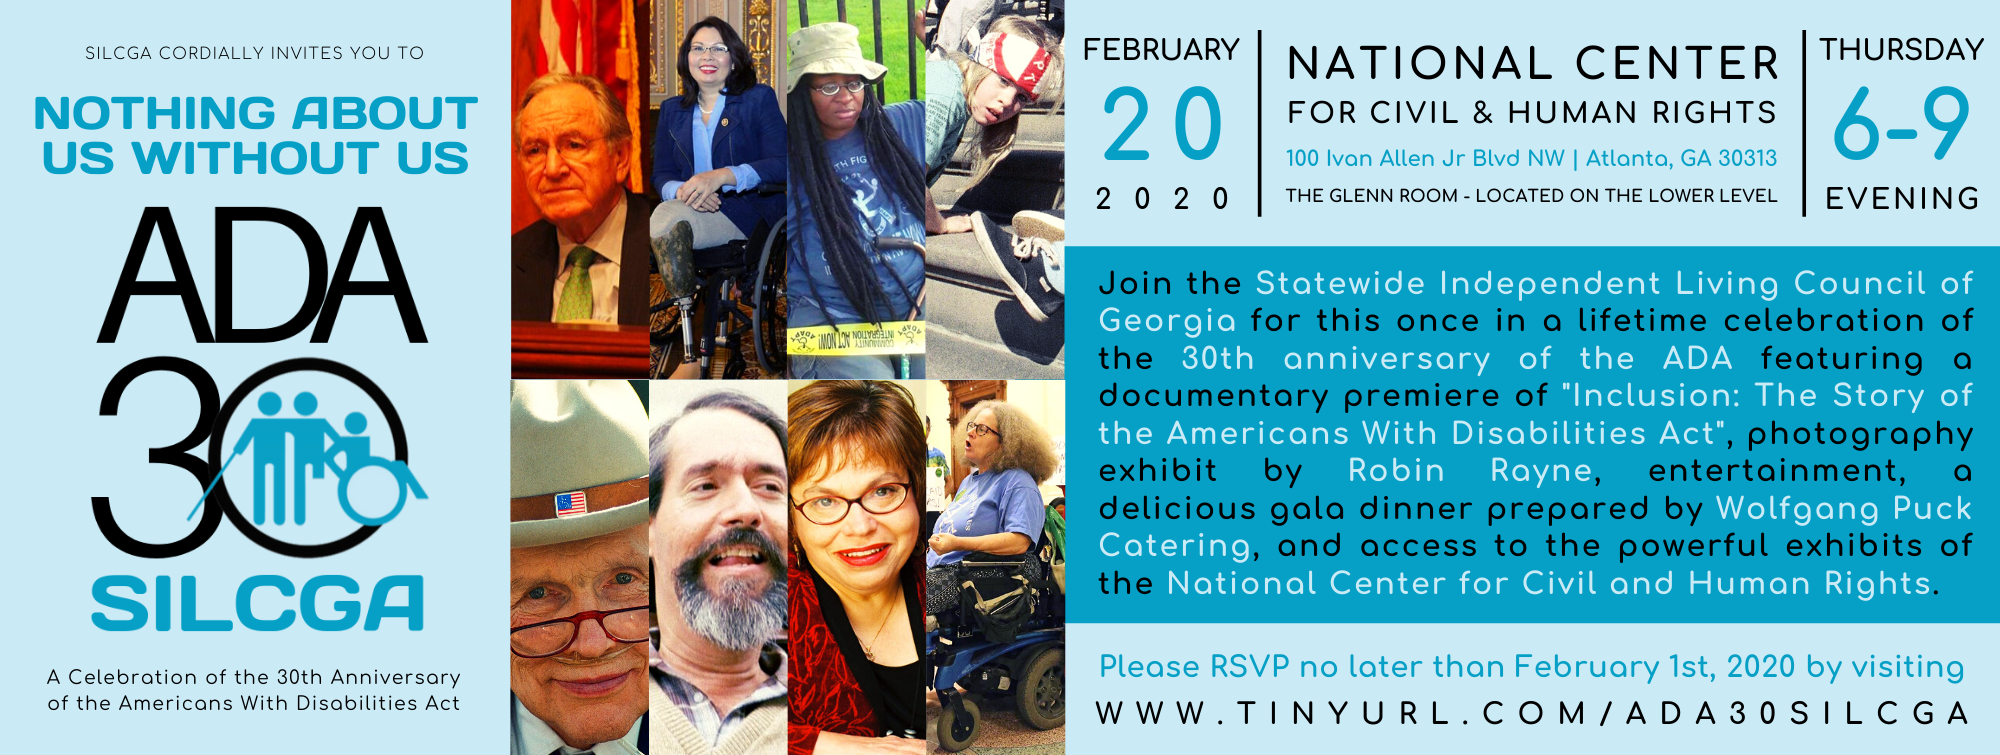 Images of Justin Dart, Ed Roberts, Judy Heumann, Stephanie Thomas, Anita Cameron, Senator Harkin, Senator Duckworth, and Jennifer Keelan with text that says SILCGA cordially invites you to Nothing About Us Without Us ADA 30 SILCGA A Celebration of the 30th Anniversary of the Americans with Disabilities ActText that says February 20 2020 National Center for Civil & Human Rights 100 Ivan Allen Jr Blvd NW Atlanta, GA 30313 The Glenn Room - Located on the Lower Level Thursday 6-9 EveningJoin the Statewide Independent Living Council of Georgia for this once in a lifetime celebration of the 30th anniversary of the ADA featuring a documentary premiere of "Inclusion: The Story of the Americans With Disabilities Act", photography exhibit by Robin Rayne, entertainment, a delicious gala dinner prepared by Wolfgang Puck Catering, and access to the powerful exhibits of the National Center for Civil and Human Rights. Please RSVP no later than February 1st, 2020 by visiting www.tinyurl.com/ada30silcga